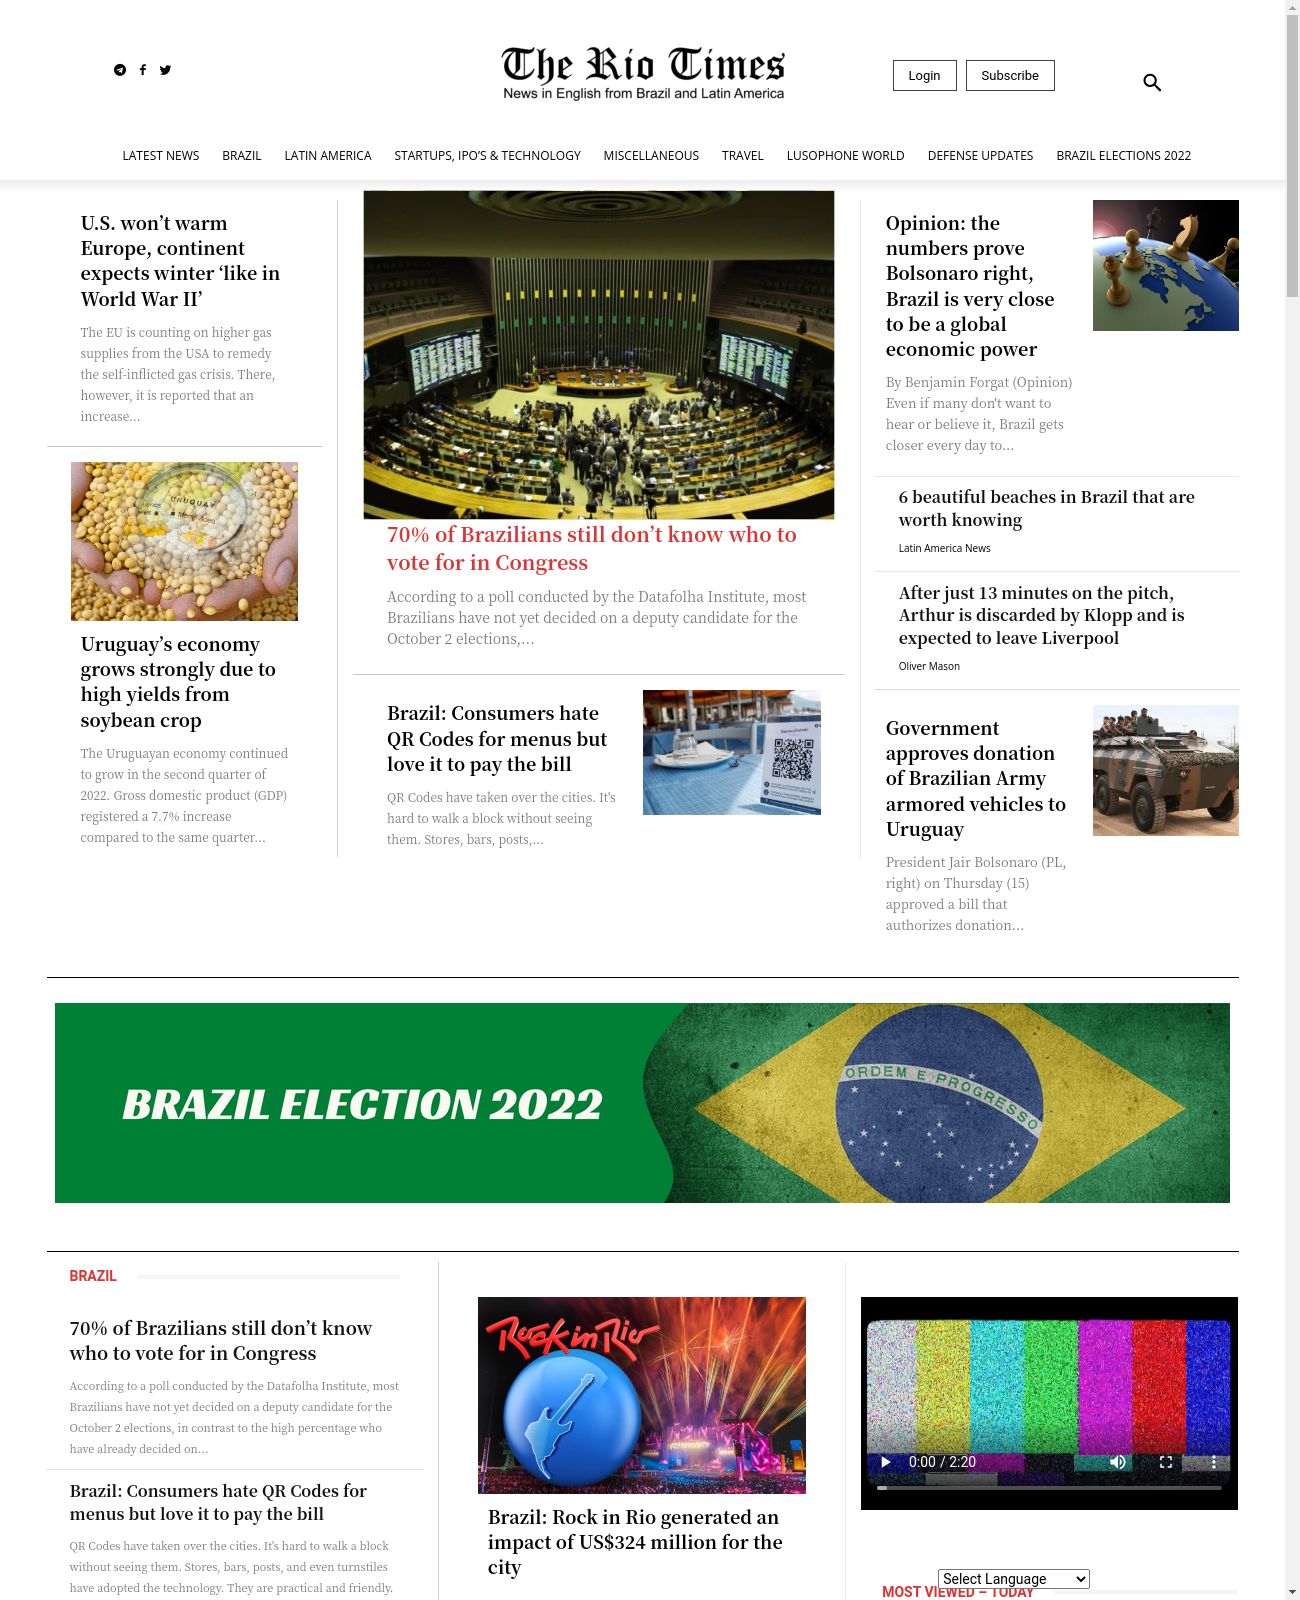 Rio Times at 2022-09-16 23:24:30-03:00 local time